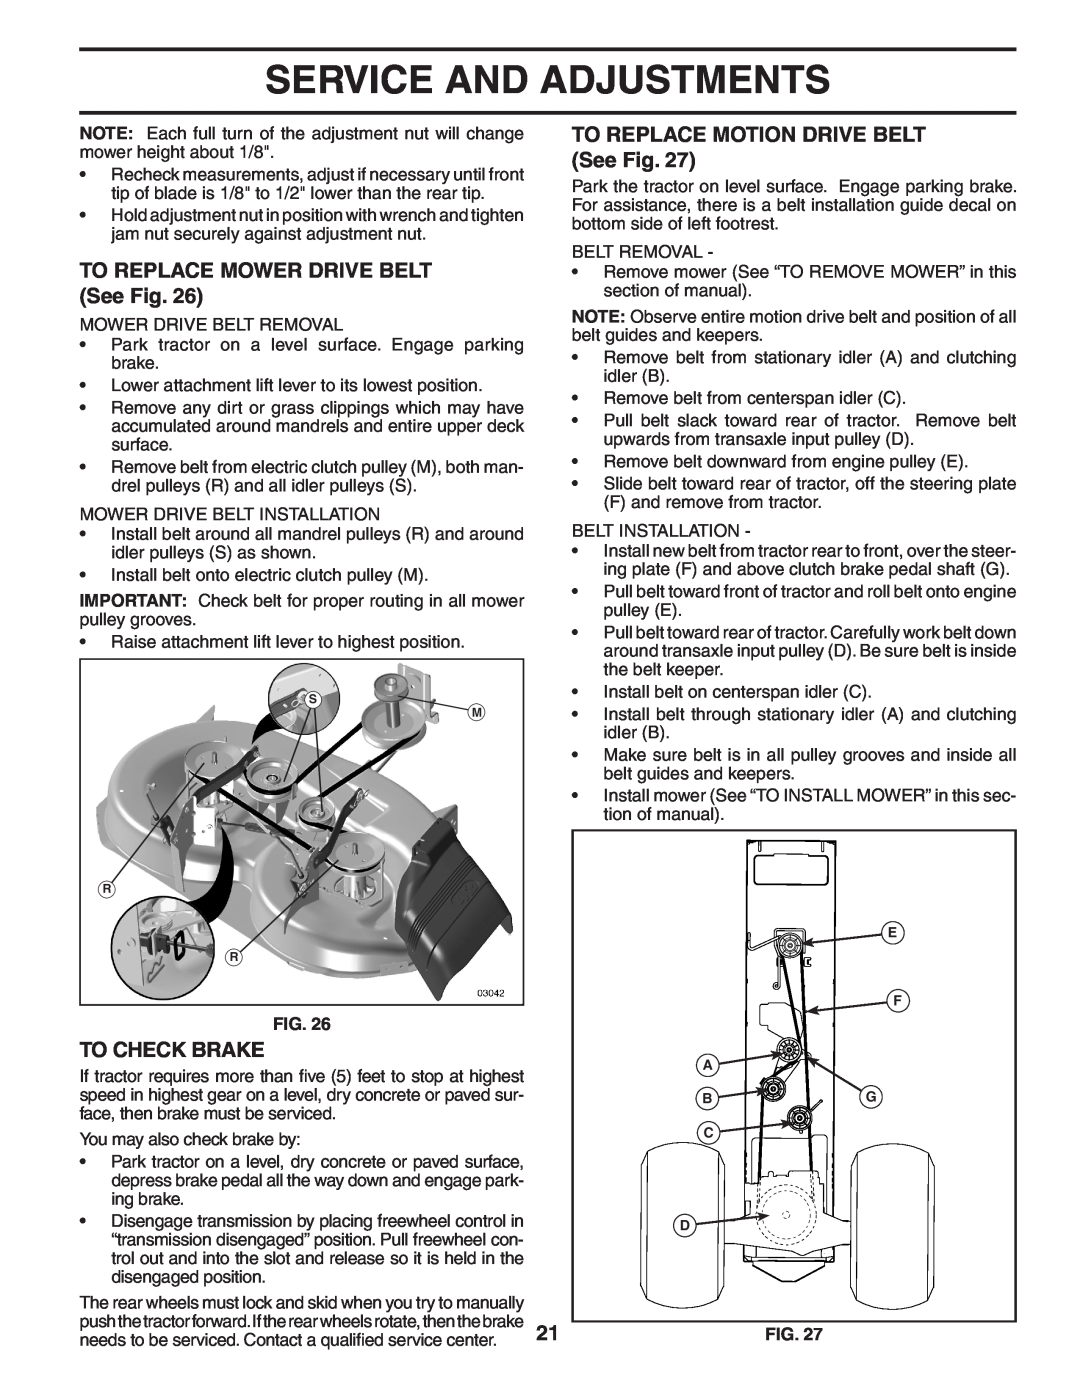 Poulan PB20H42YT manual TO REPLACE MOWER DRIVE BELT See Fig, To Check Brake, TO REPLACE MOTION DRIVE BELT See Fig 